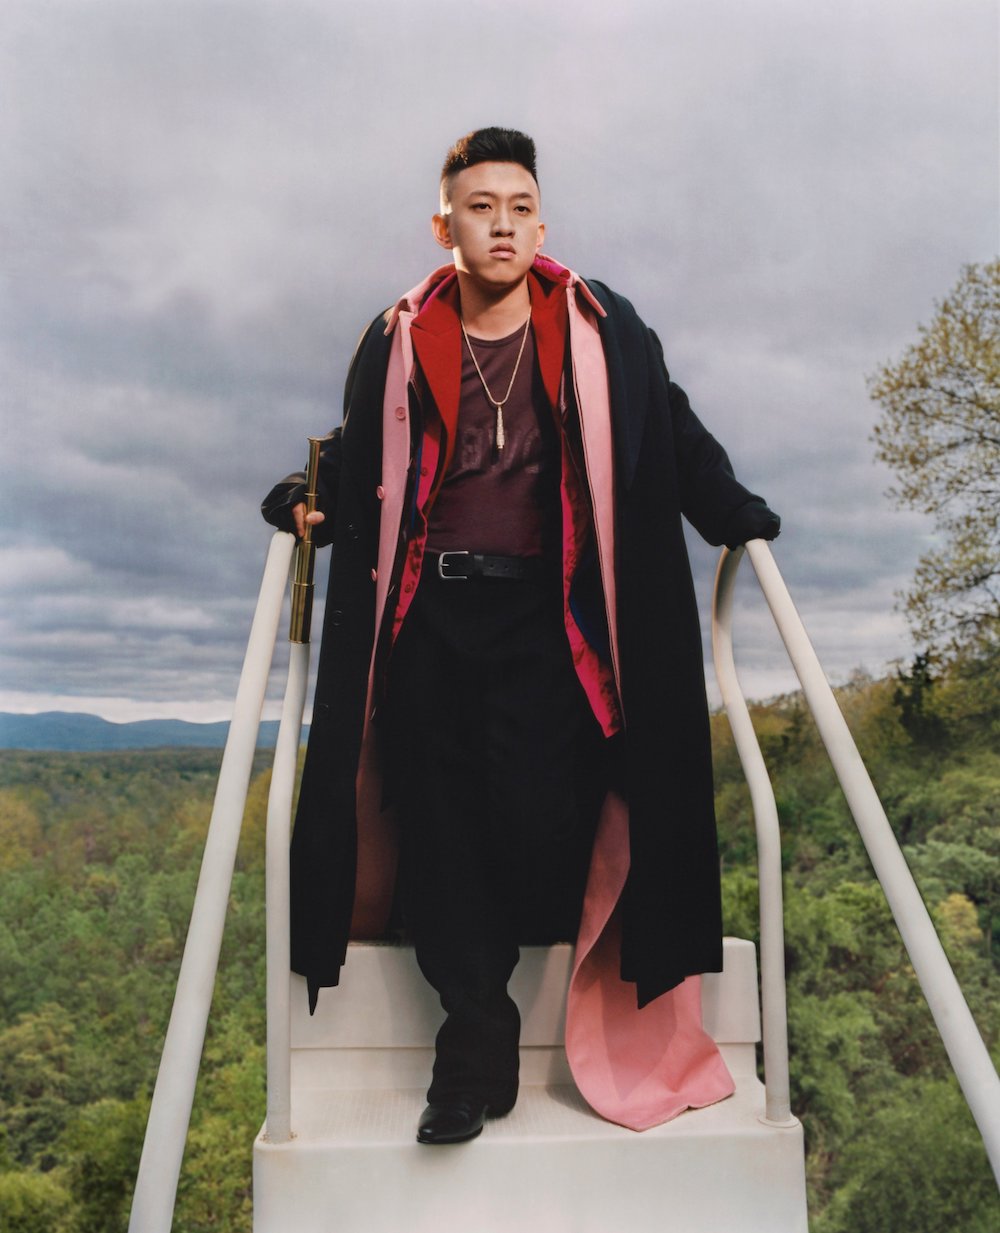 rich brian in article 2